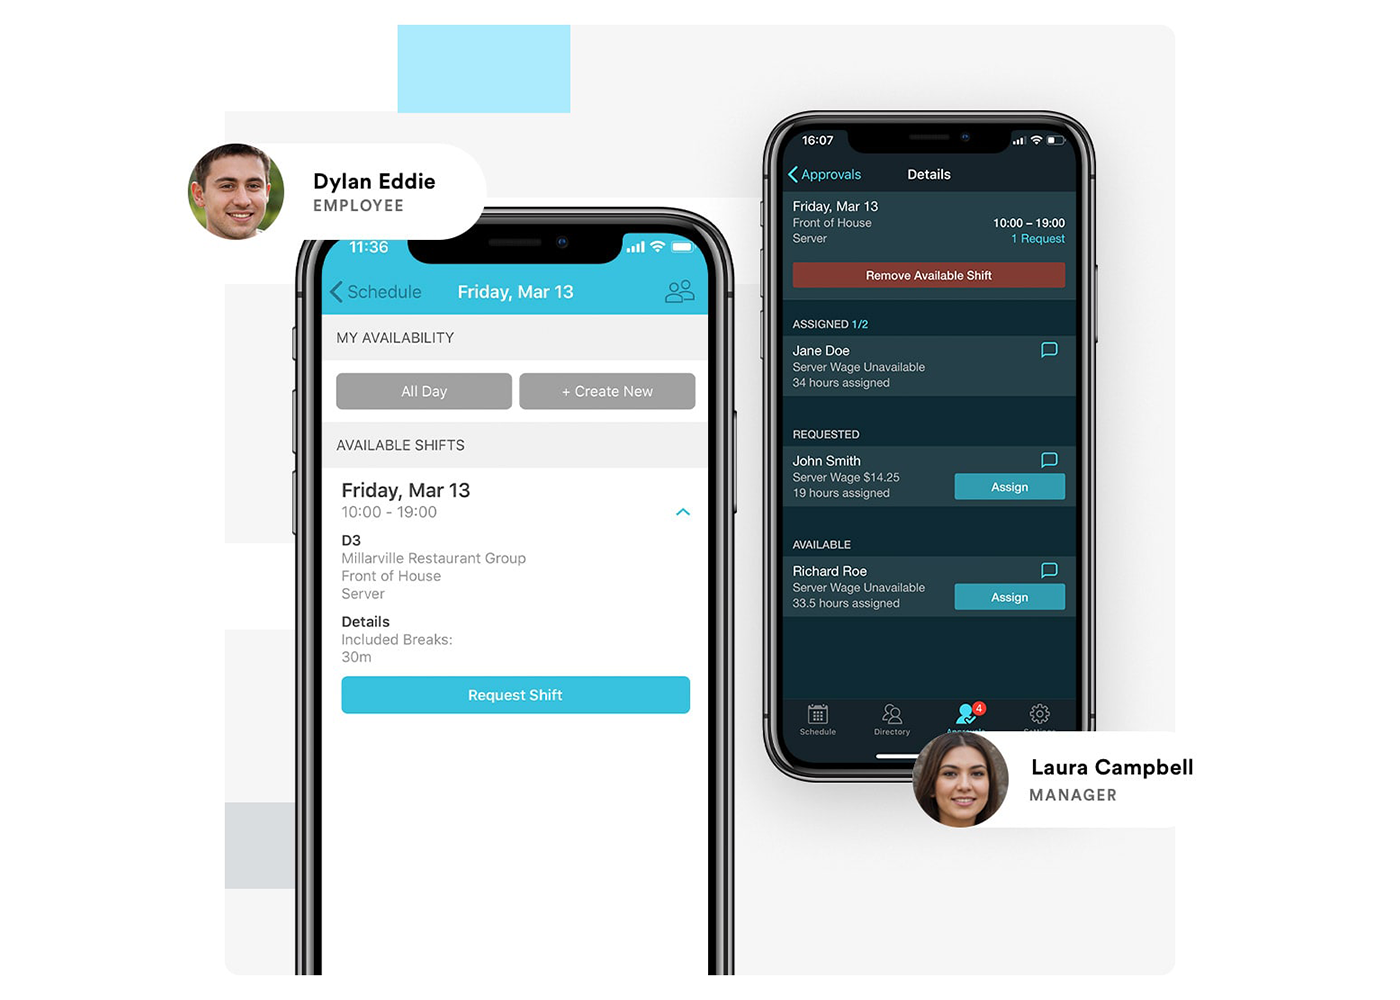 Set availability and communicate between employees and managers from your phone